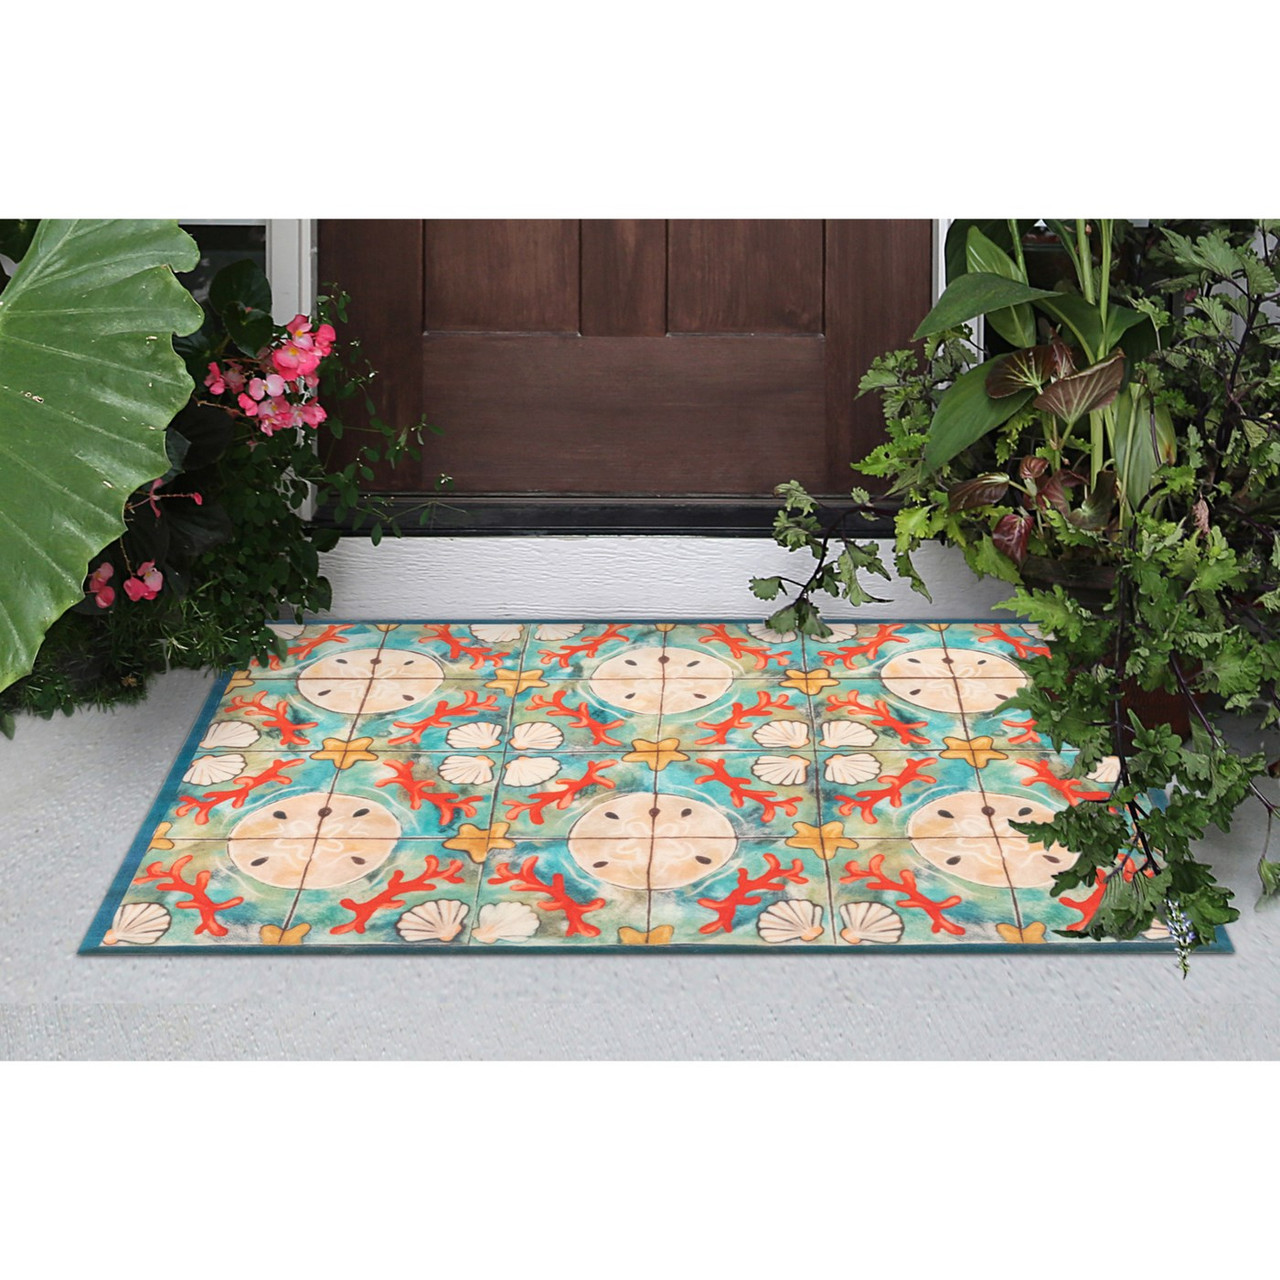 Illusions Ocean Shell Tile Indoor/Outdoor Rug - 4 Sizes -  Lifestyle